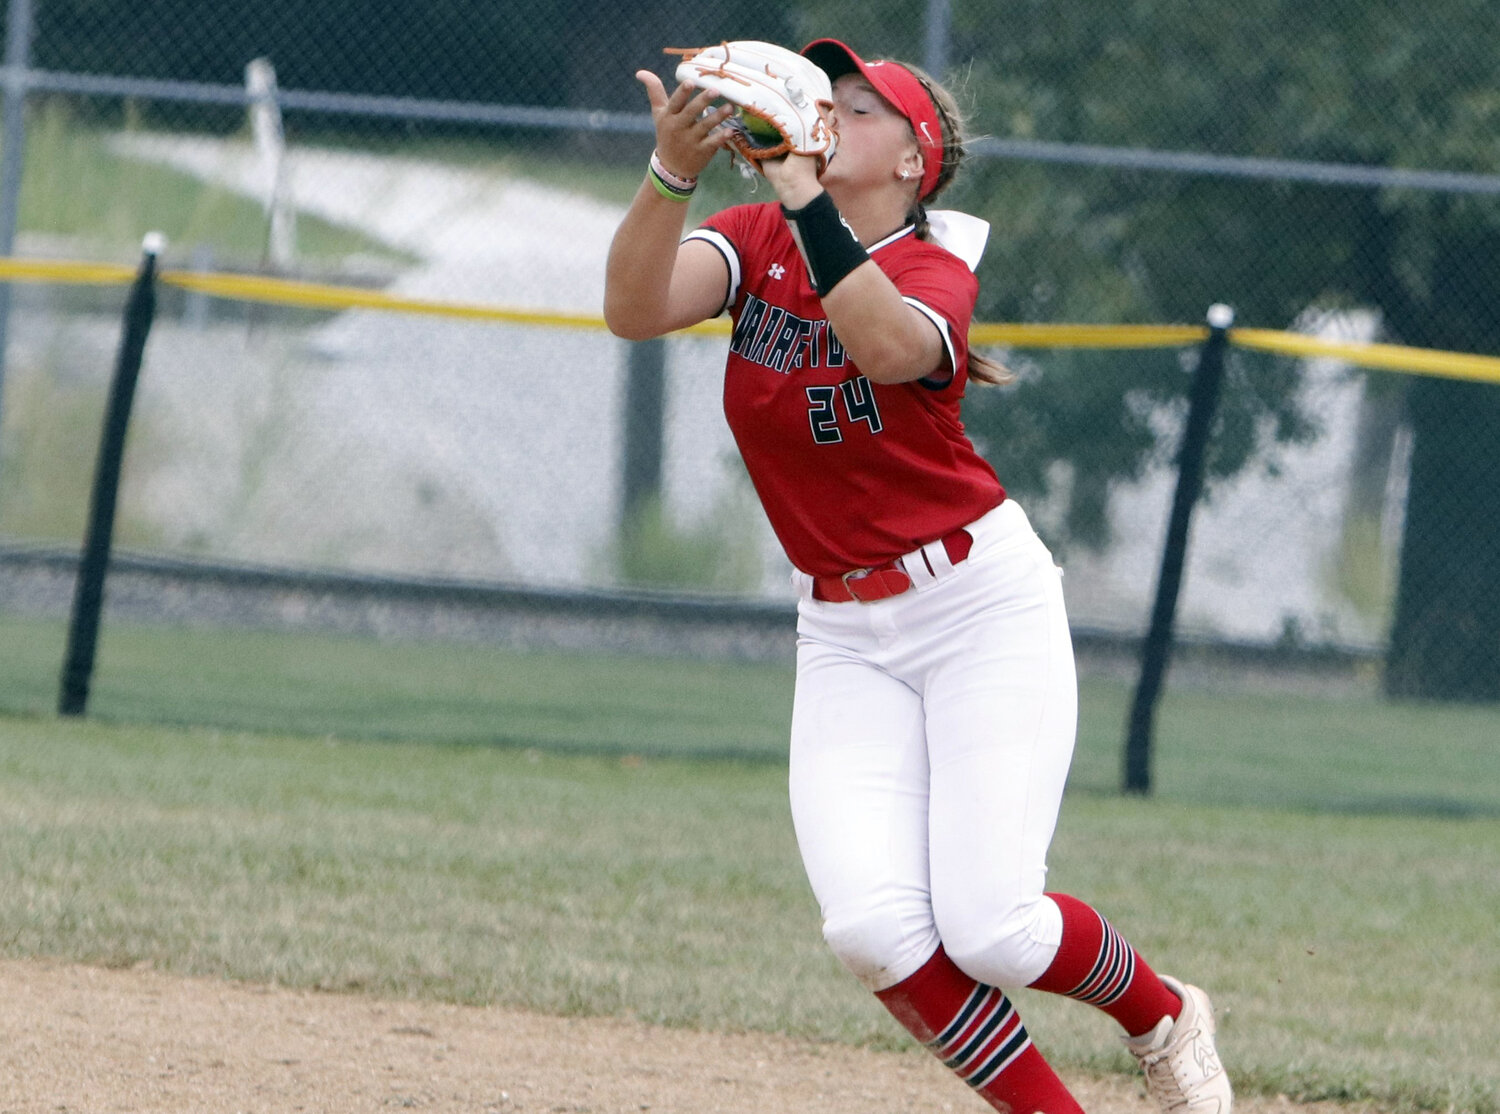 Makayla Witthaus catches a fly ball during Warrenton’s road game against St. Dominic.